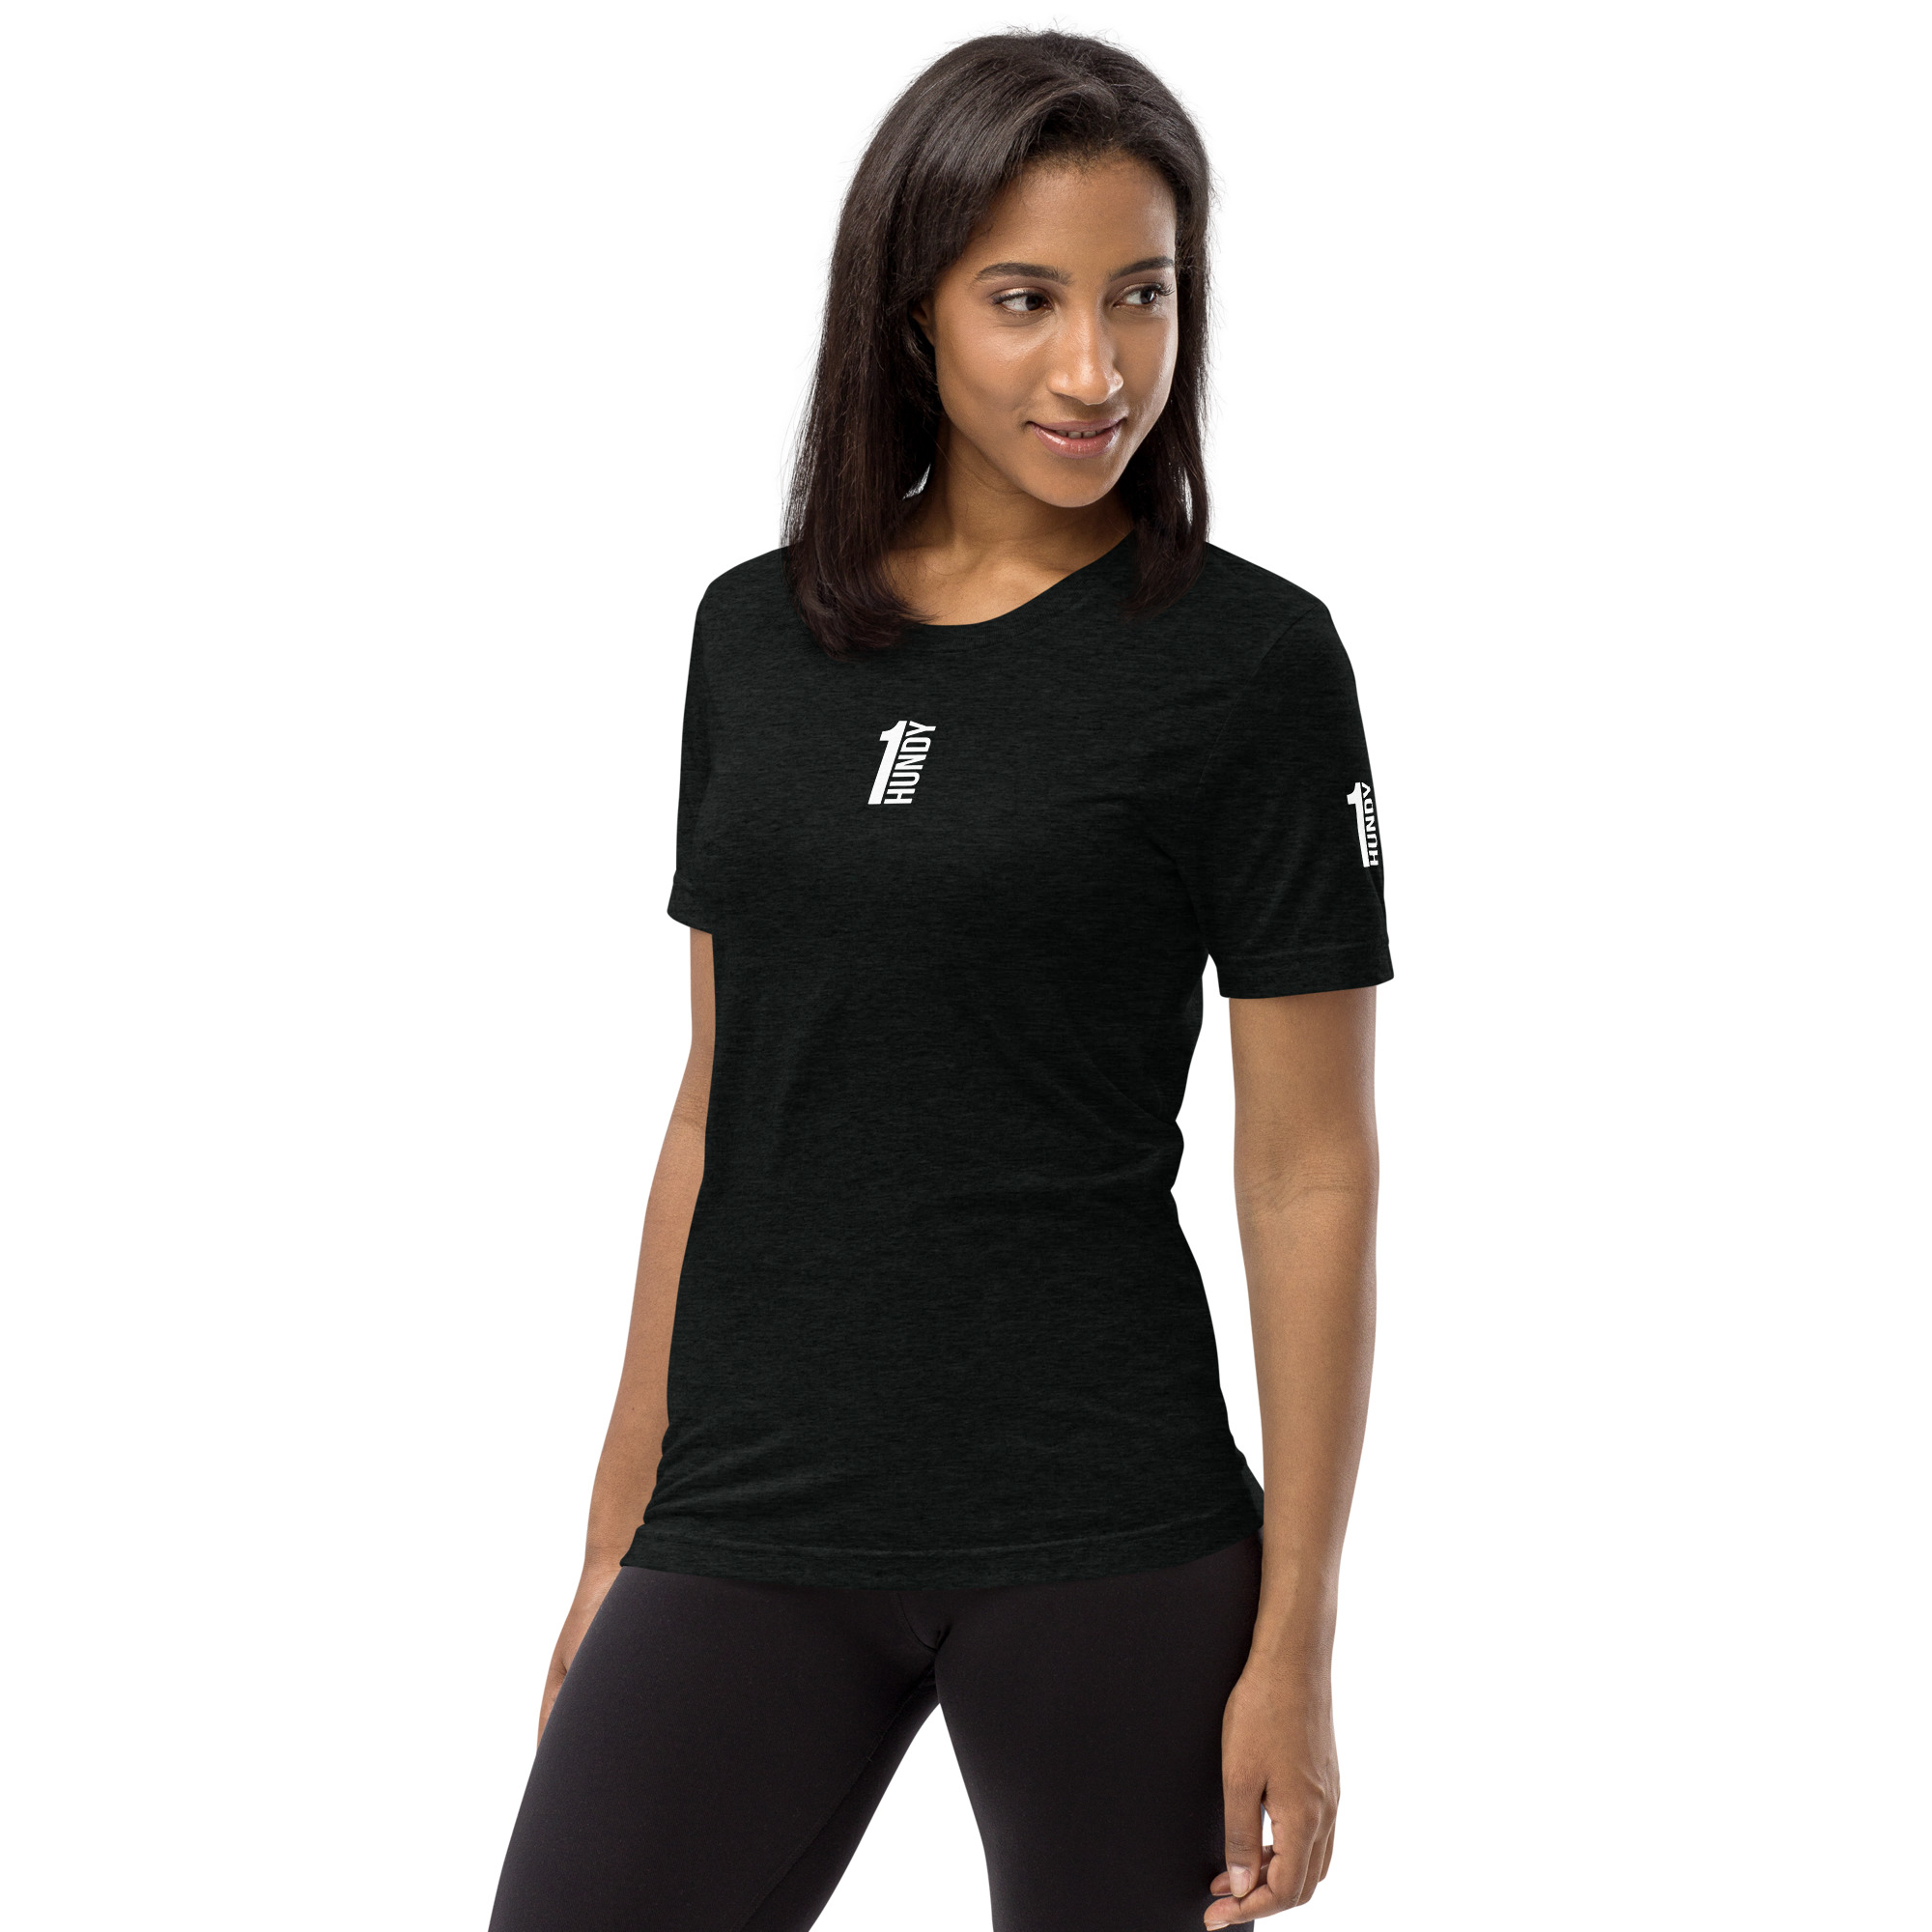 Women's gym & fitness clothing by 1HUNDY